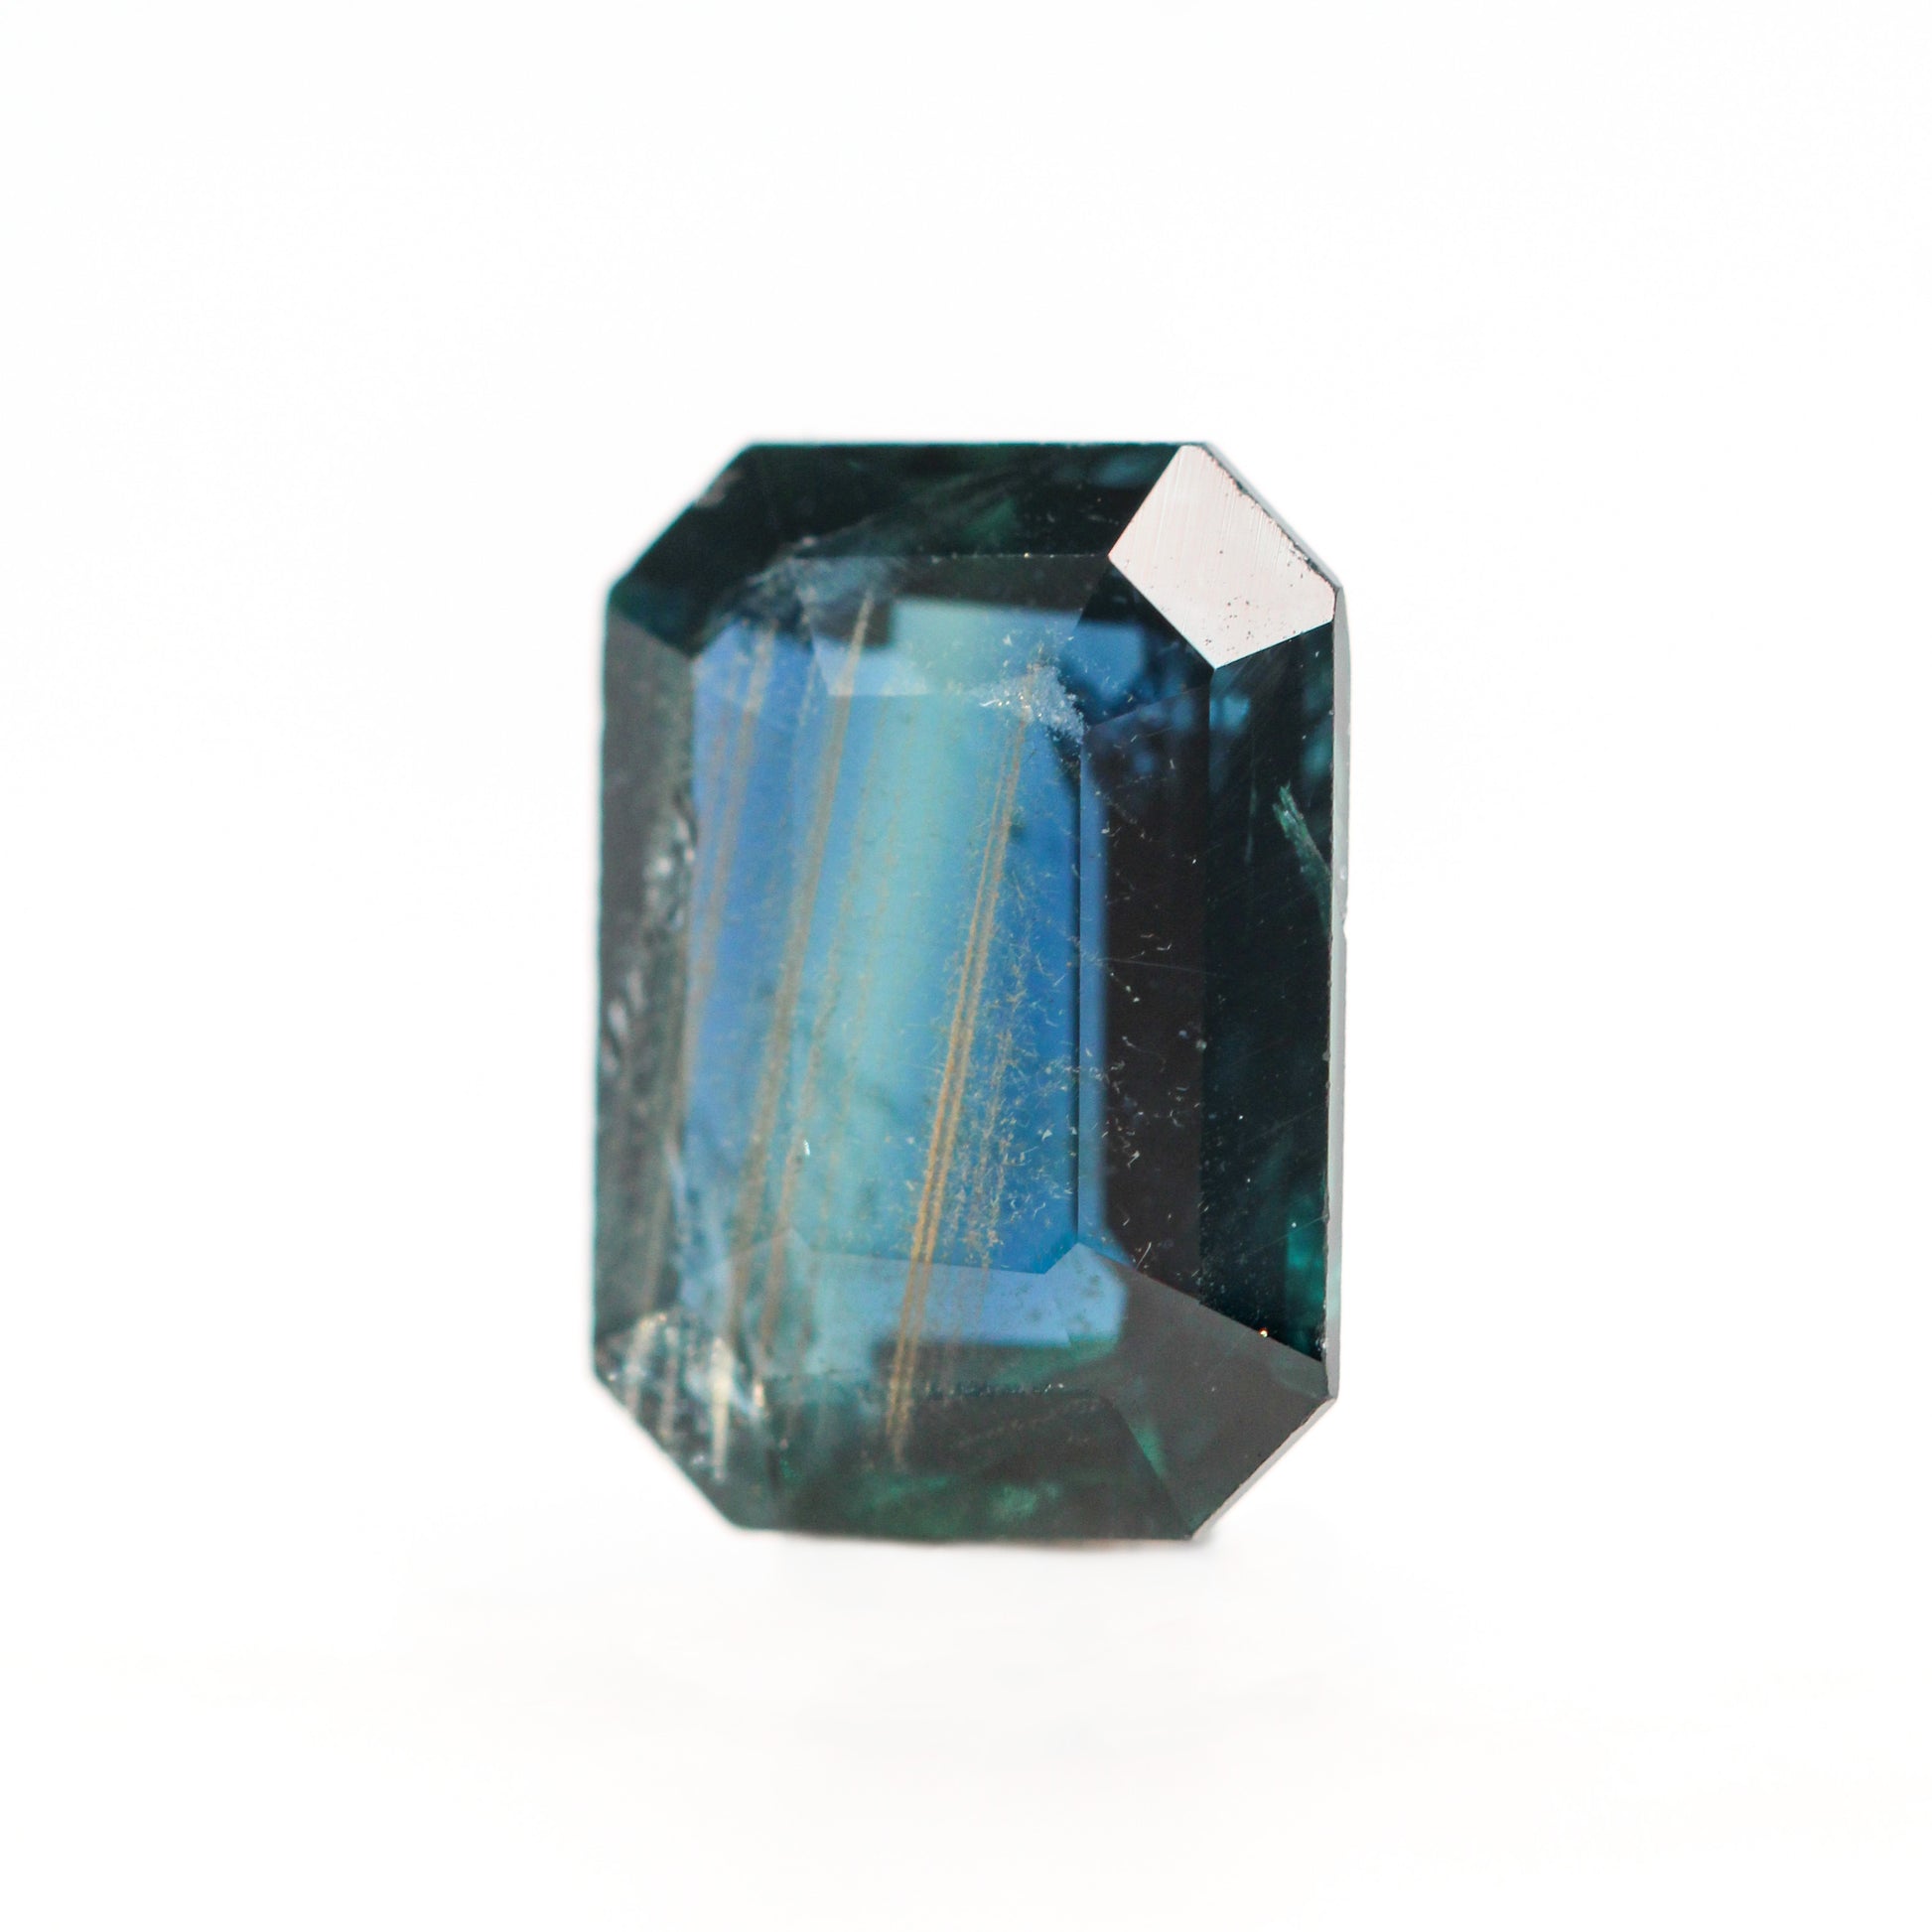 2.20 Carat Emerald Cut Teal Iolite for Custom Work - Inventory Code BEI220 - Midwinter Co. Alternative Bridal Rings and Modern Fine Jewelry